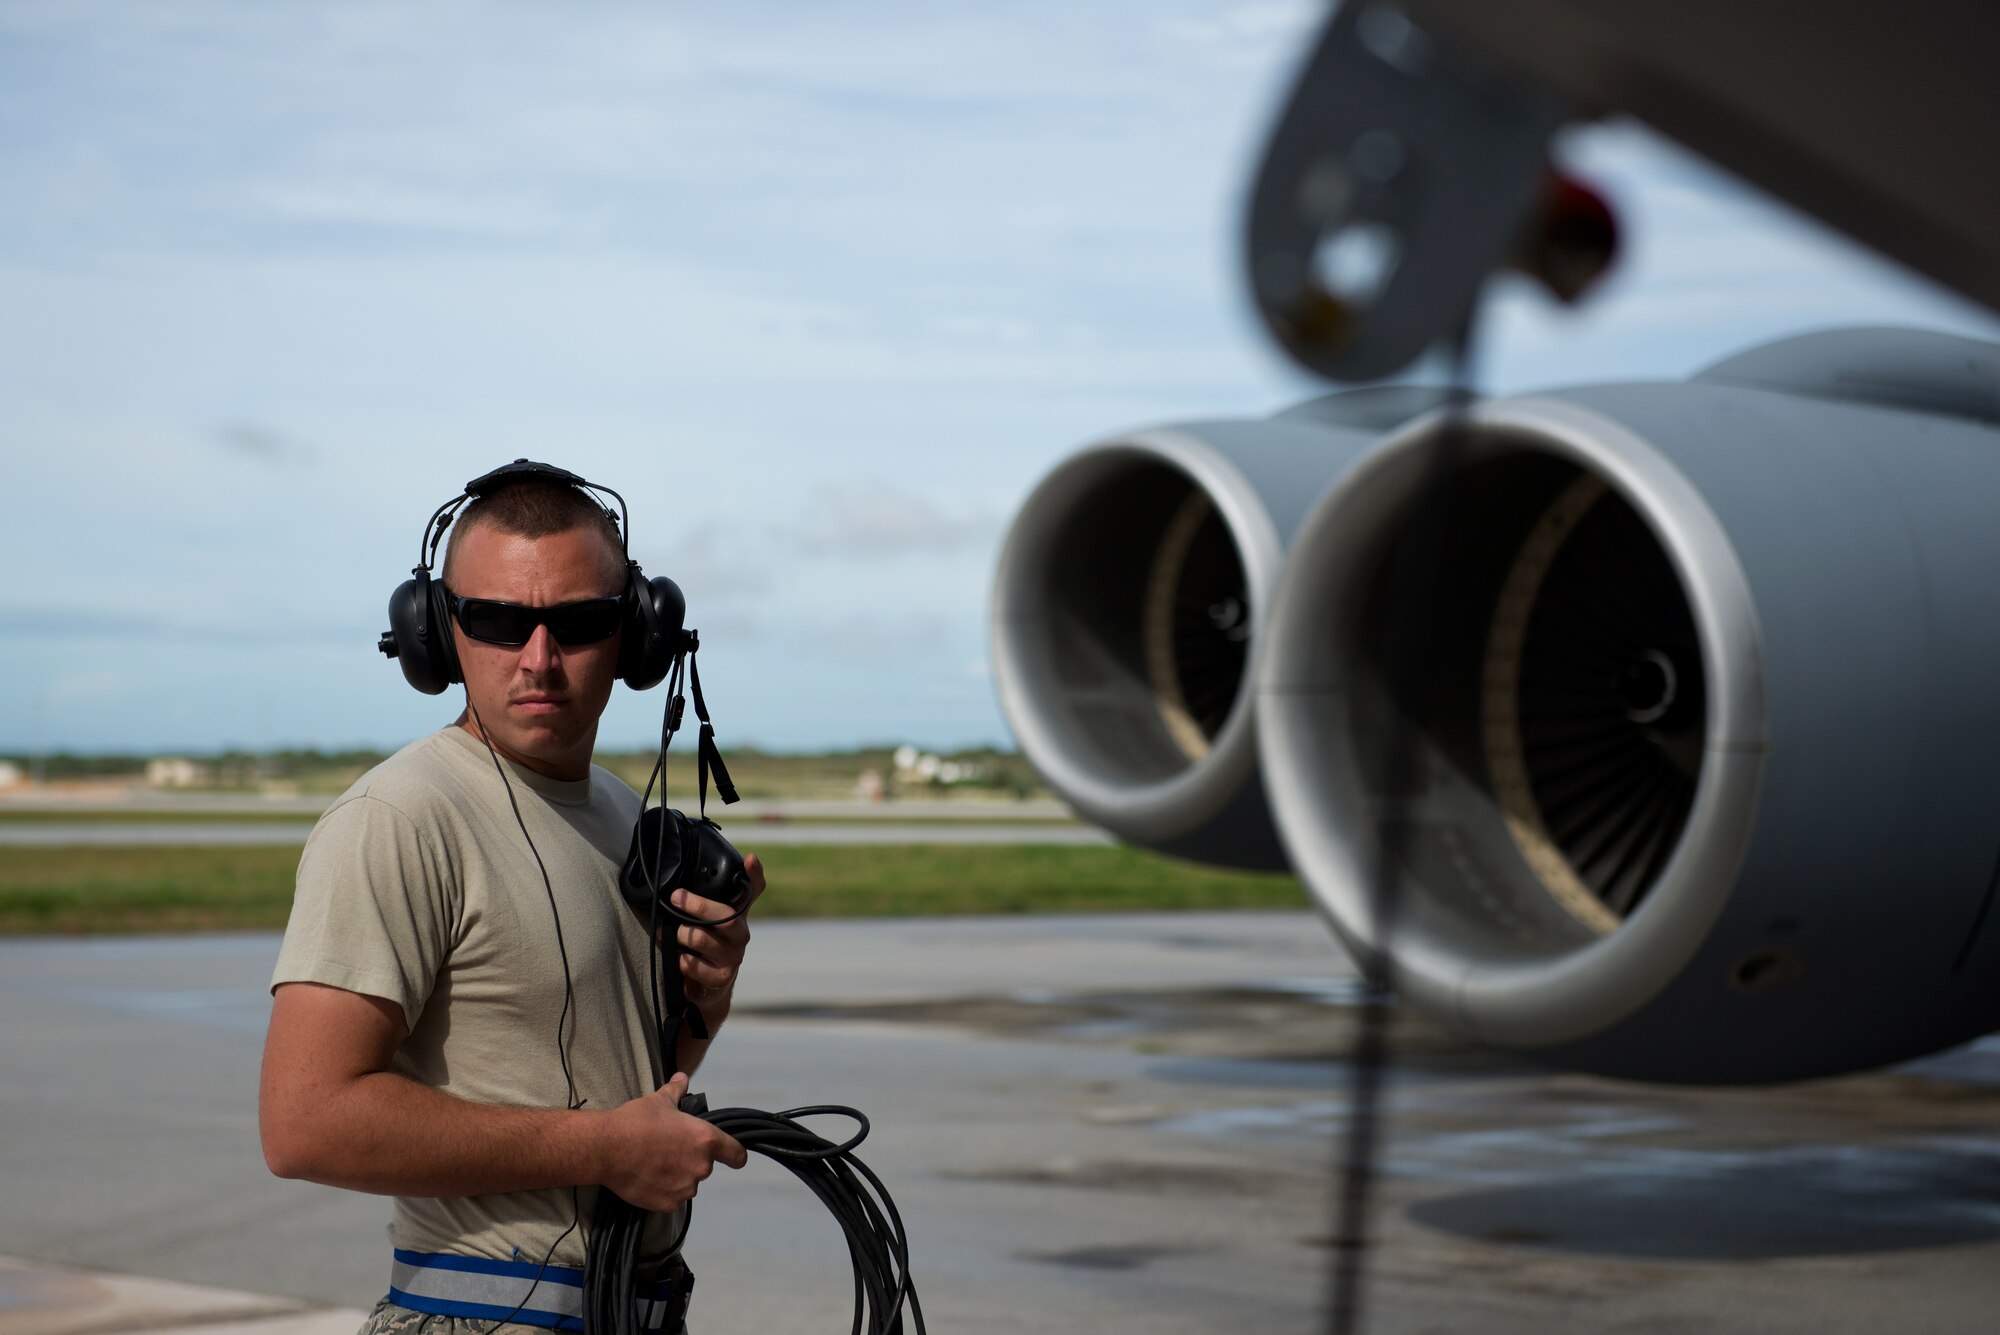 U.S. Air Force Airman 1st Class Adam Carignan inspects flight controls of a KC-135 Stratotanker, which is deployed to the 506th Expeditionary Air Refueling Squadron from the 157th Air Refueling Wing, N.H., as part of a preflight inspection, Jan. 21, 2015, Andersen AFB, Guam. Carignan is deployed as a crew chief to the 506 EARS, in support of the KC-135 mission to refuel Andersen’s current fighters, airlifter, and bombers’ along the Pacific region. (U.S. Air National Guard photo by Senior Airman Kayla McWalter/RELEASED)